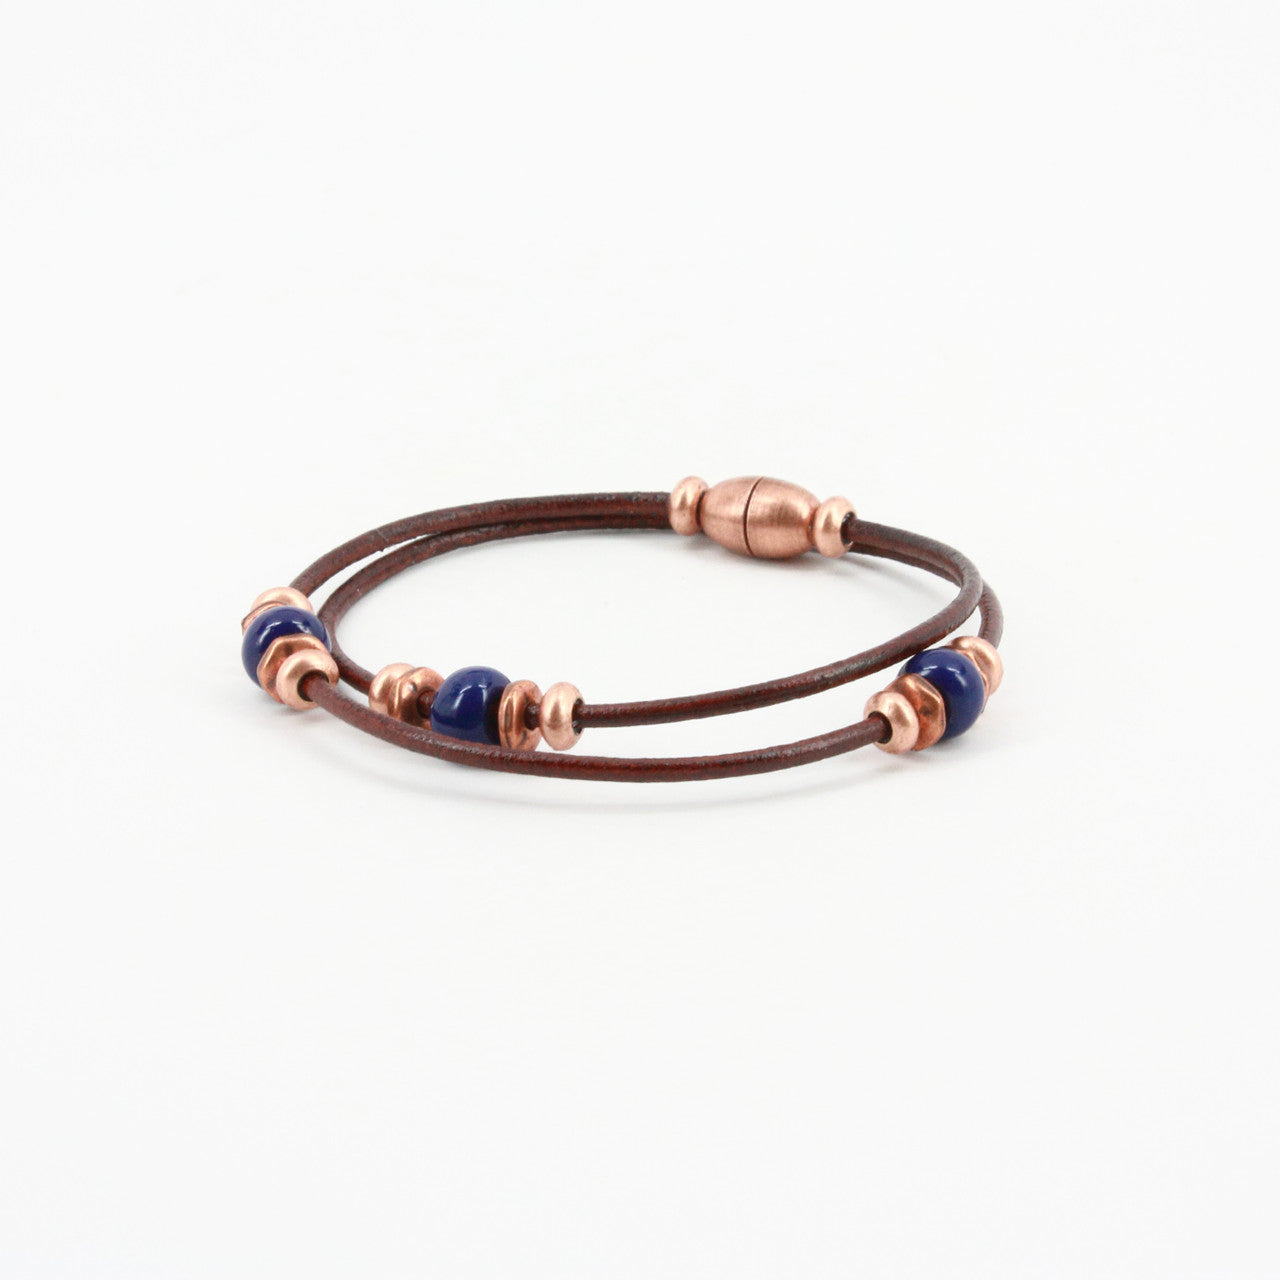 Harness Leather Double Wrap Bracelet with Copper and Navy Beads by Torino Leather